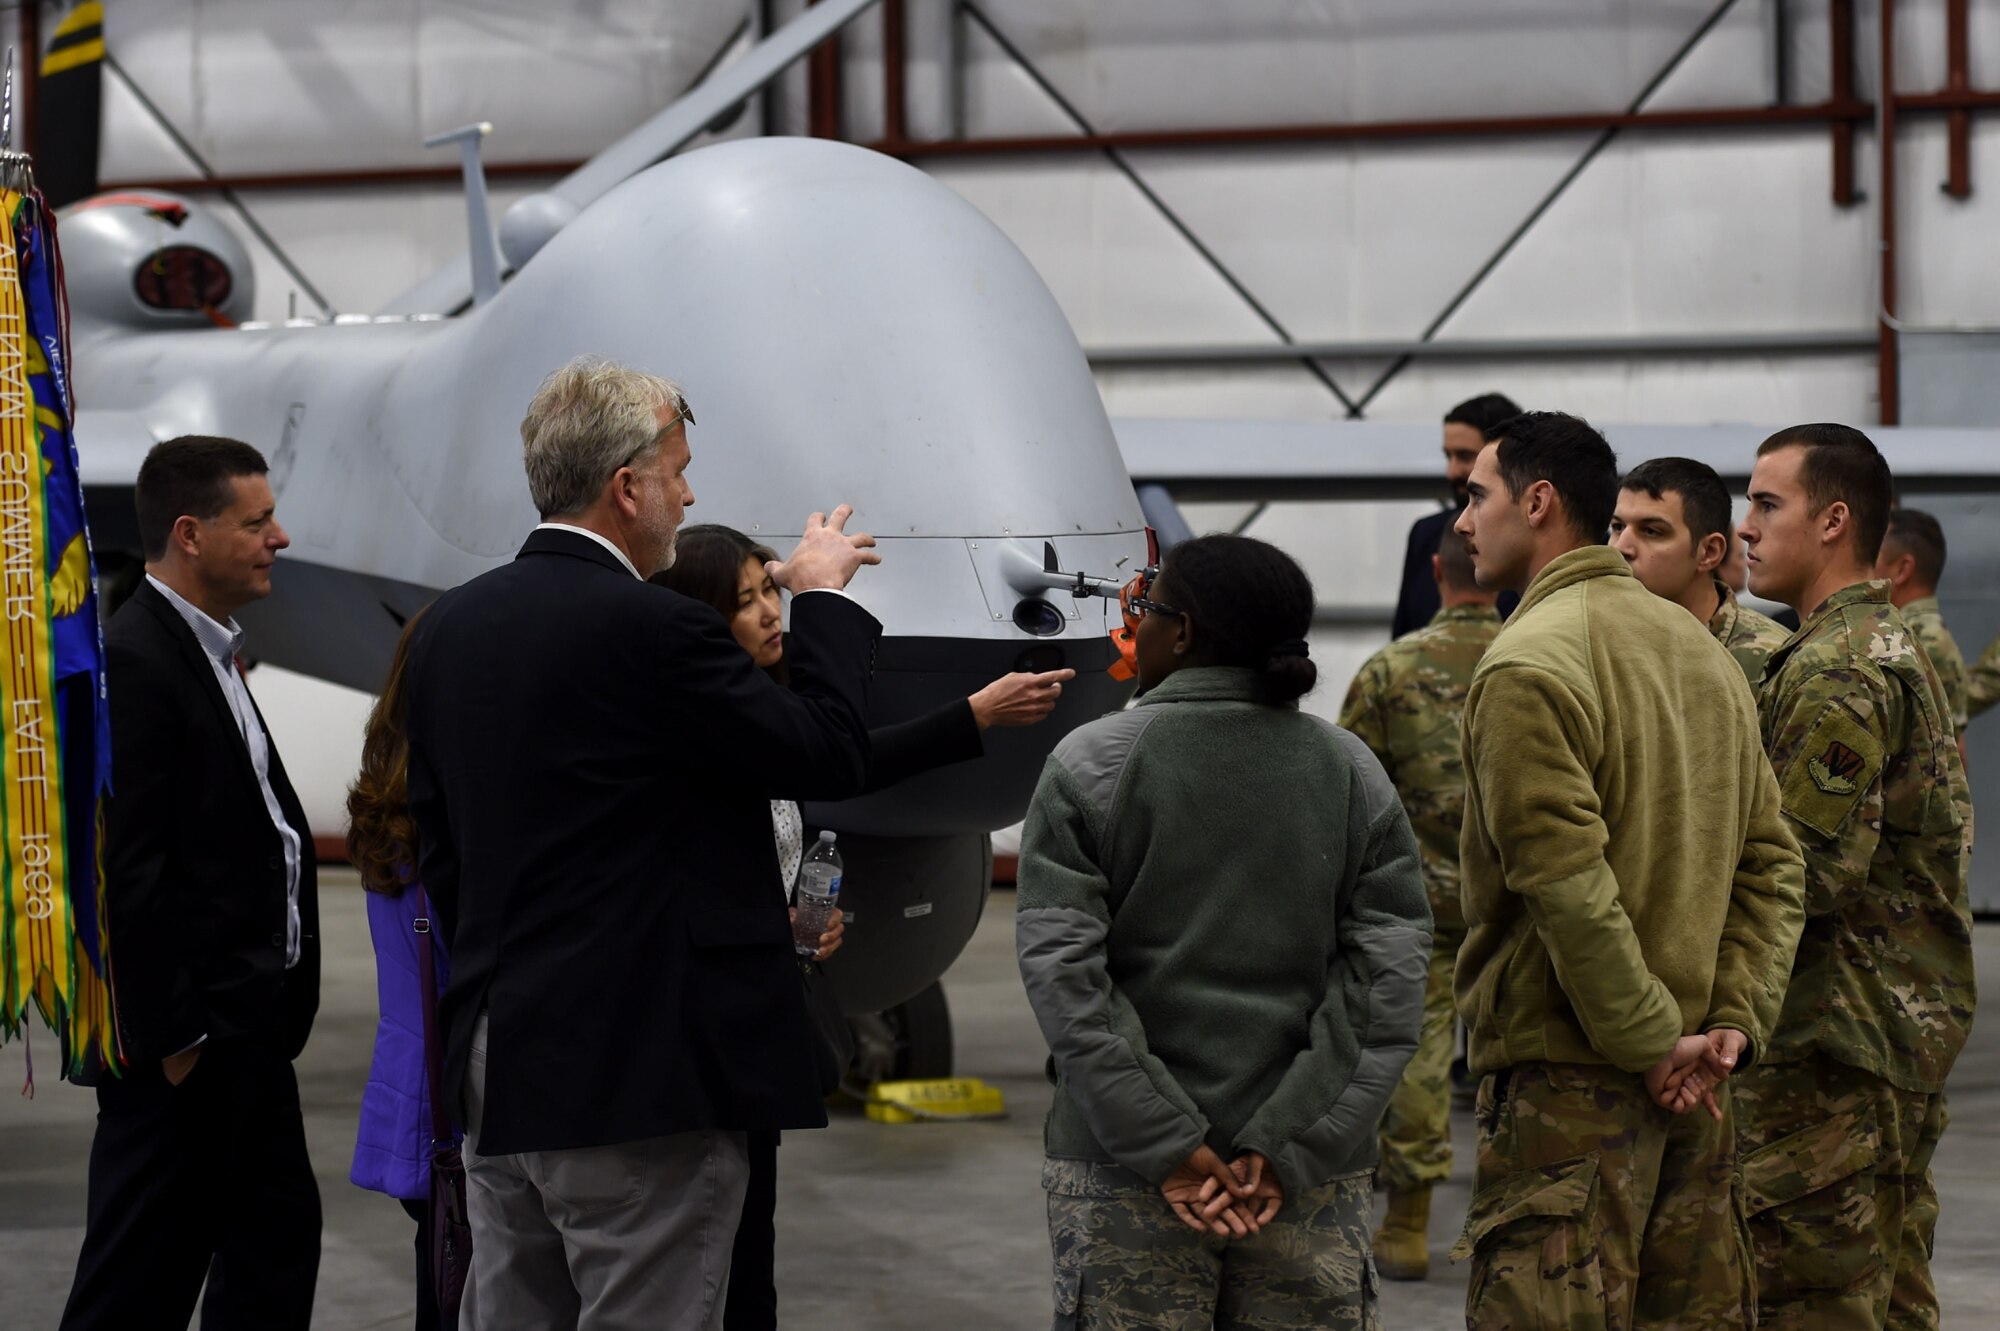 Members of the 432nd Wing and the Las Vegas community stand in a hangar near an MQ-9 Reaper